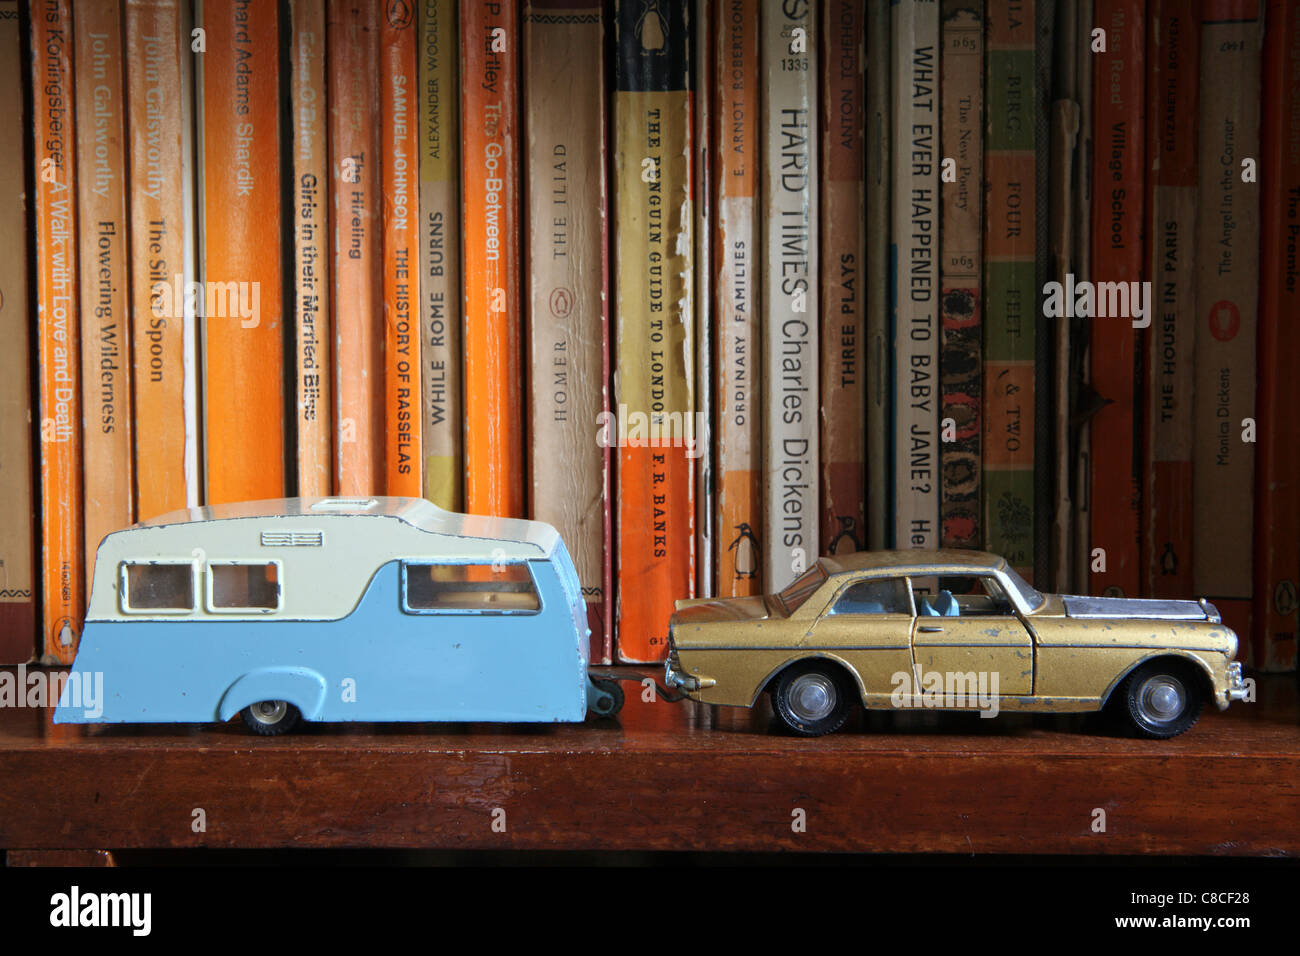 Vintage Dinky toy Rolls Royce, towing caravan, along front of bookshelf with paperback novels behind Stock Photo